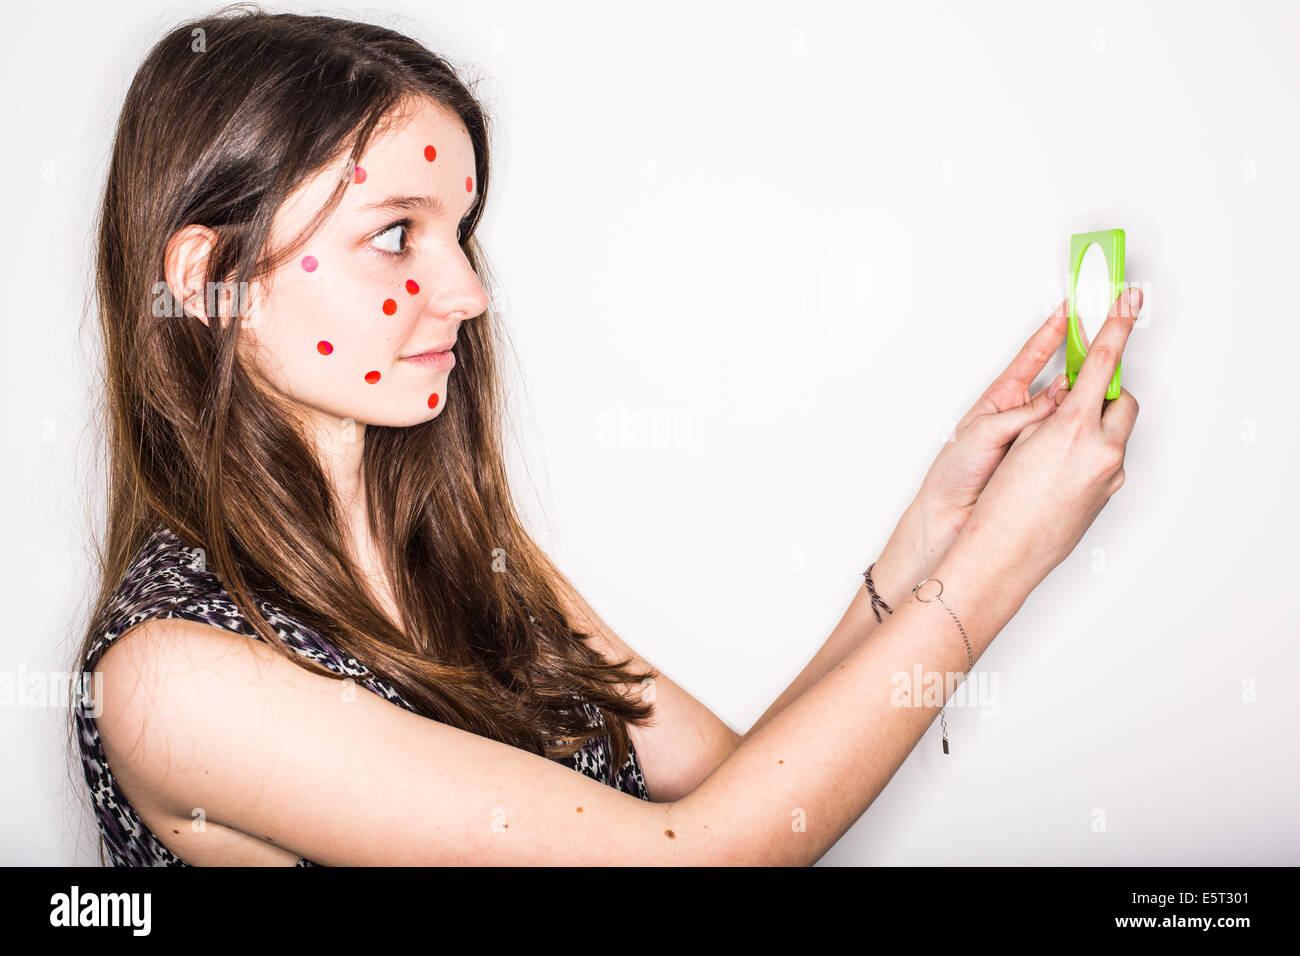 Humorous image of a teenage girl with pimples on the face. Stock Photo